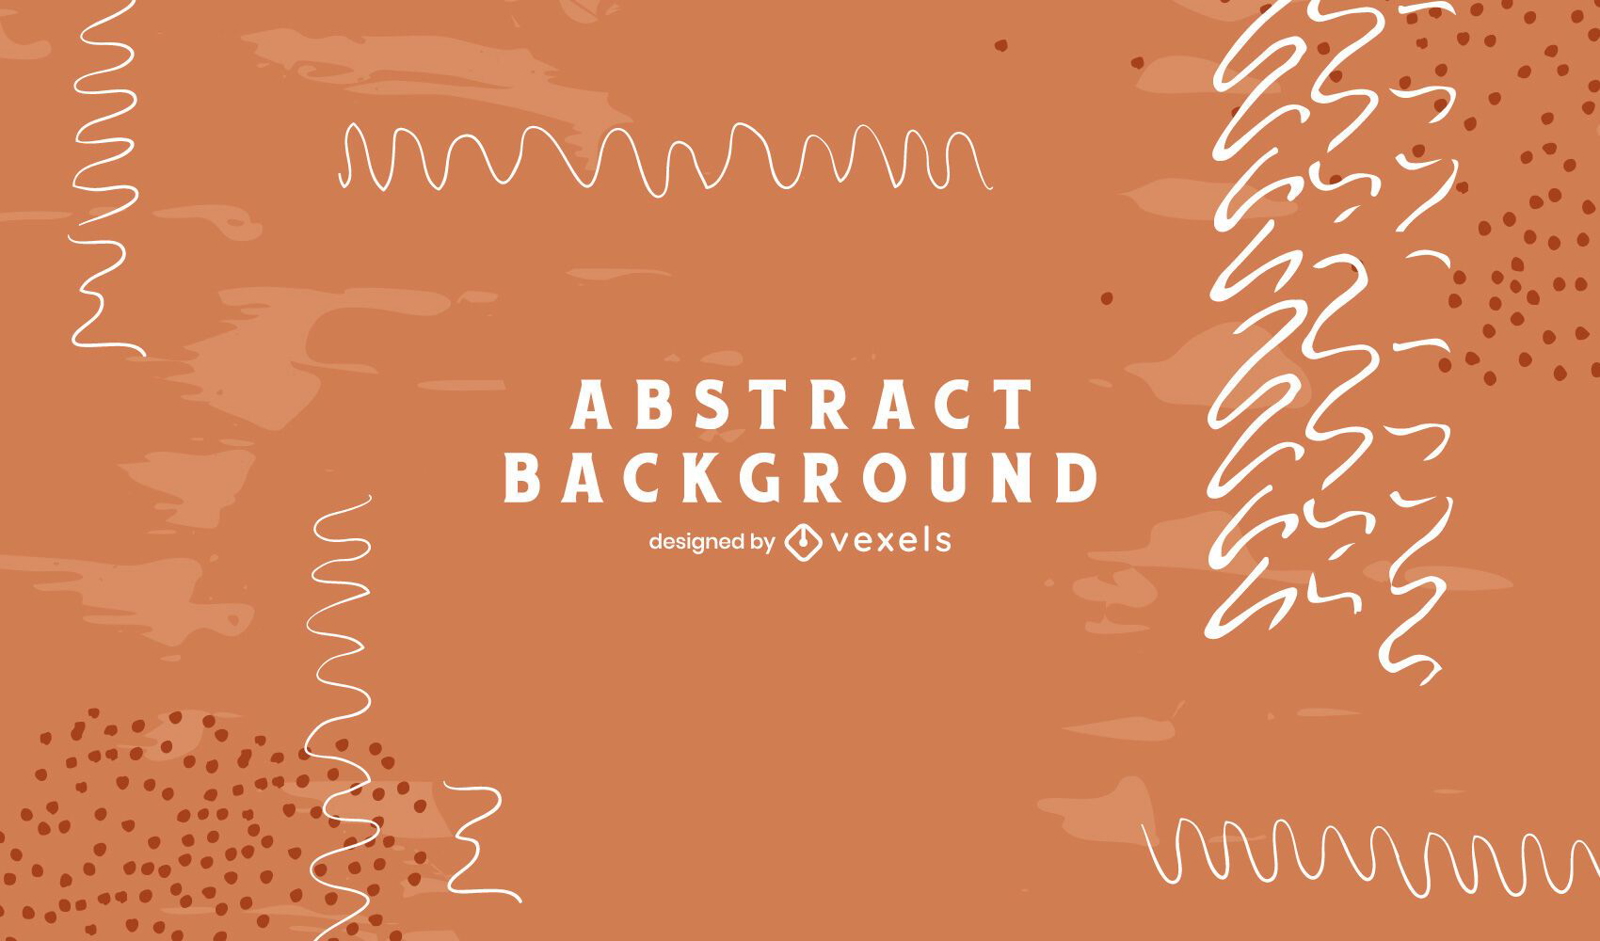 Artistic abstract lines background design